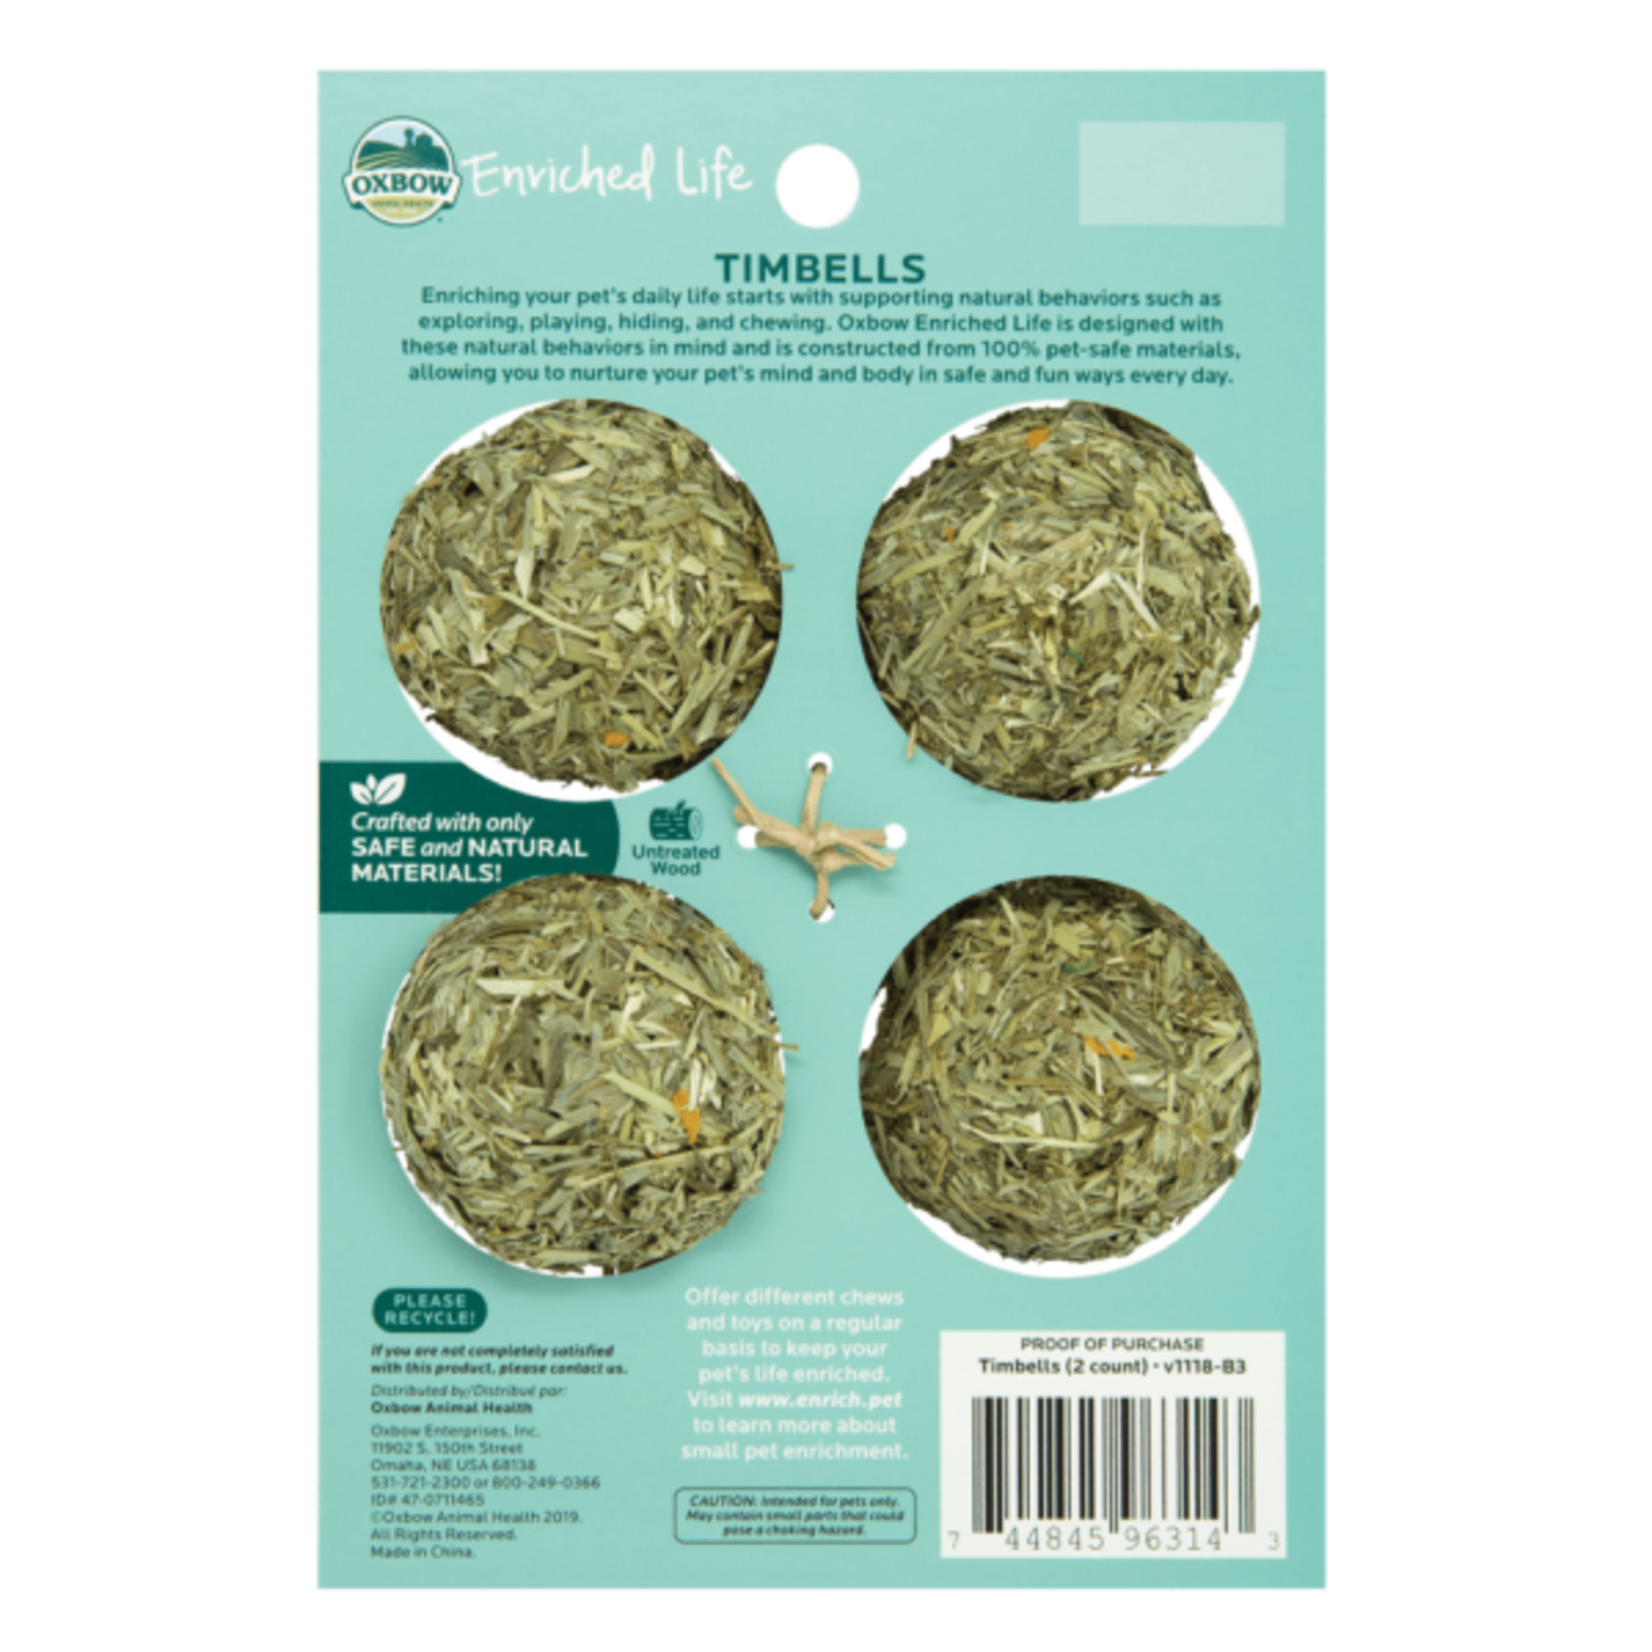 Oxbow Animal Health Enriched Life Timbells